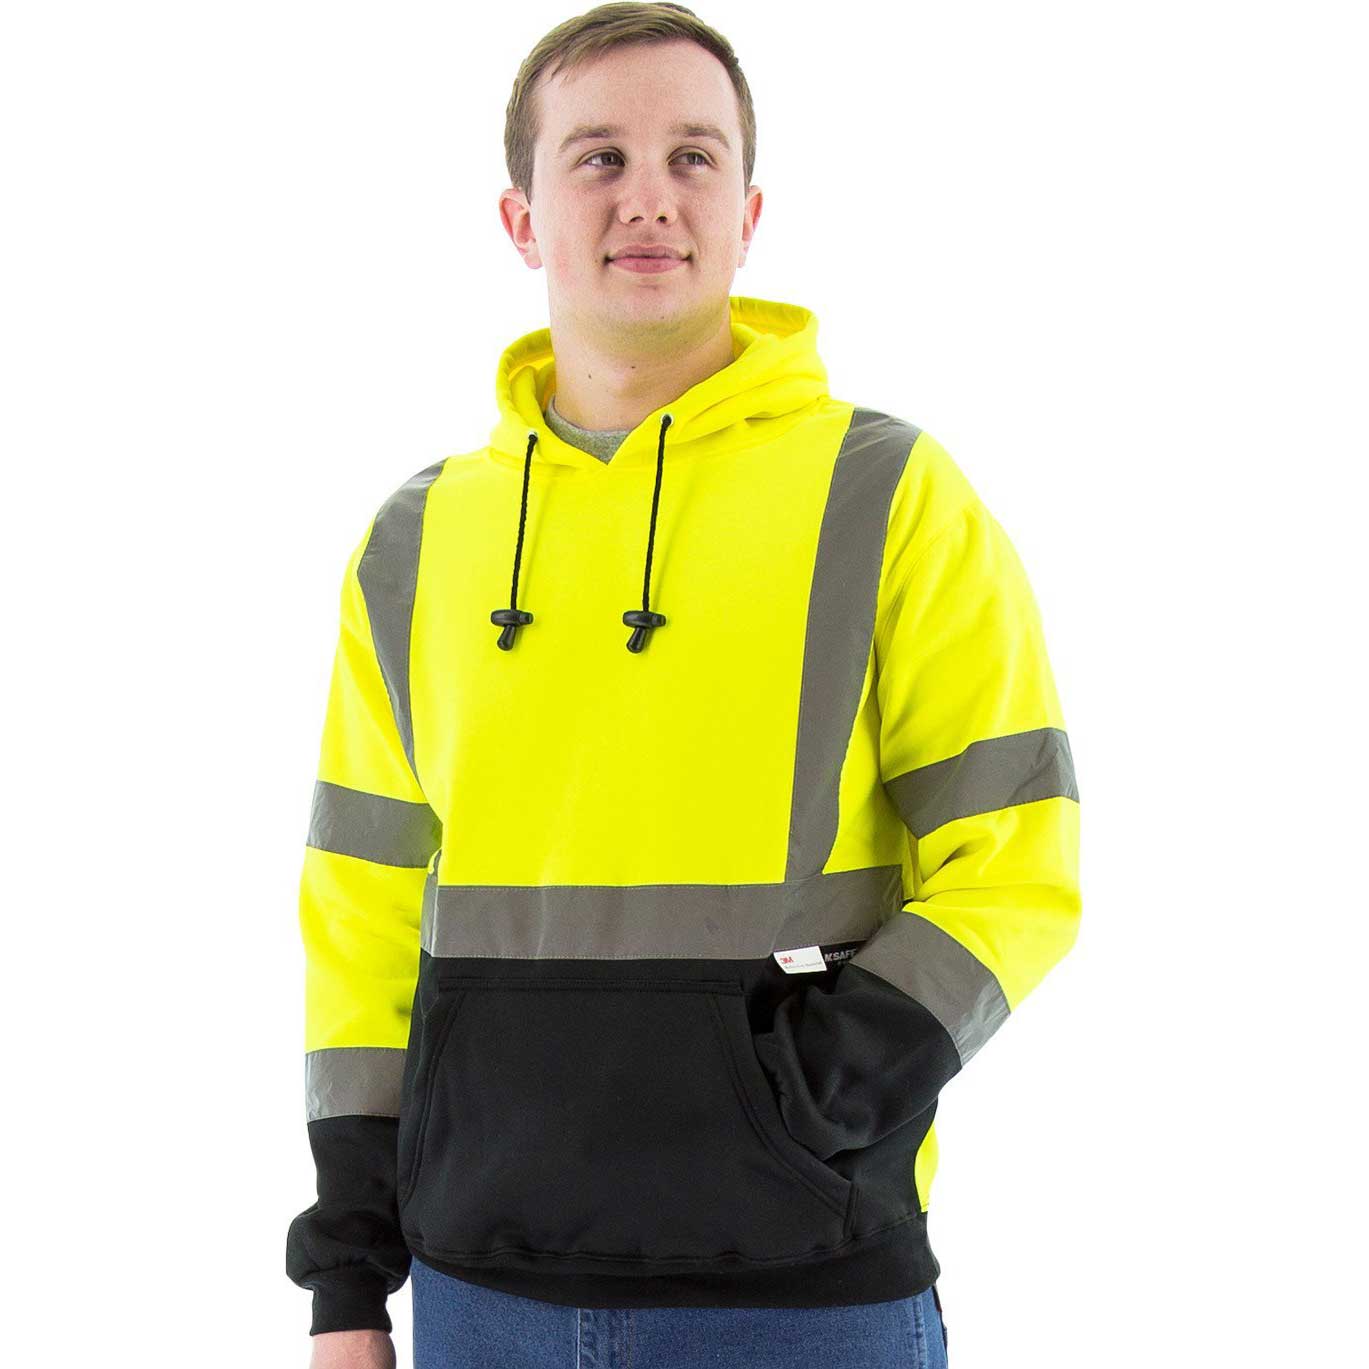 Majestic Safety Hooded Pullover Sweatshirt, Hi-Vis Yellow, Class 3 – 75-5327